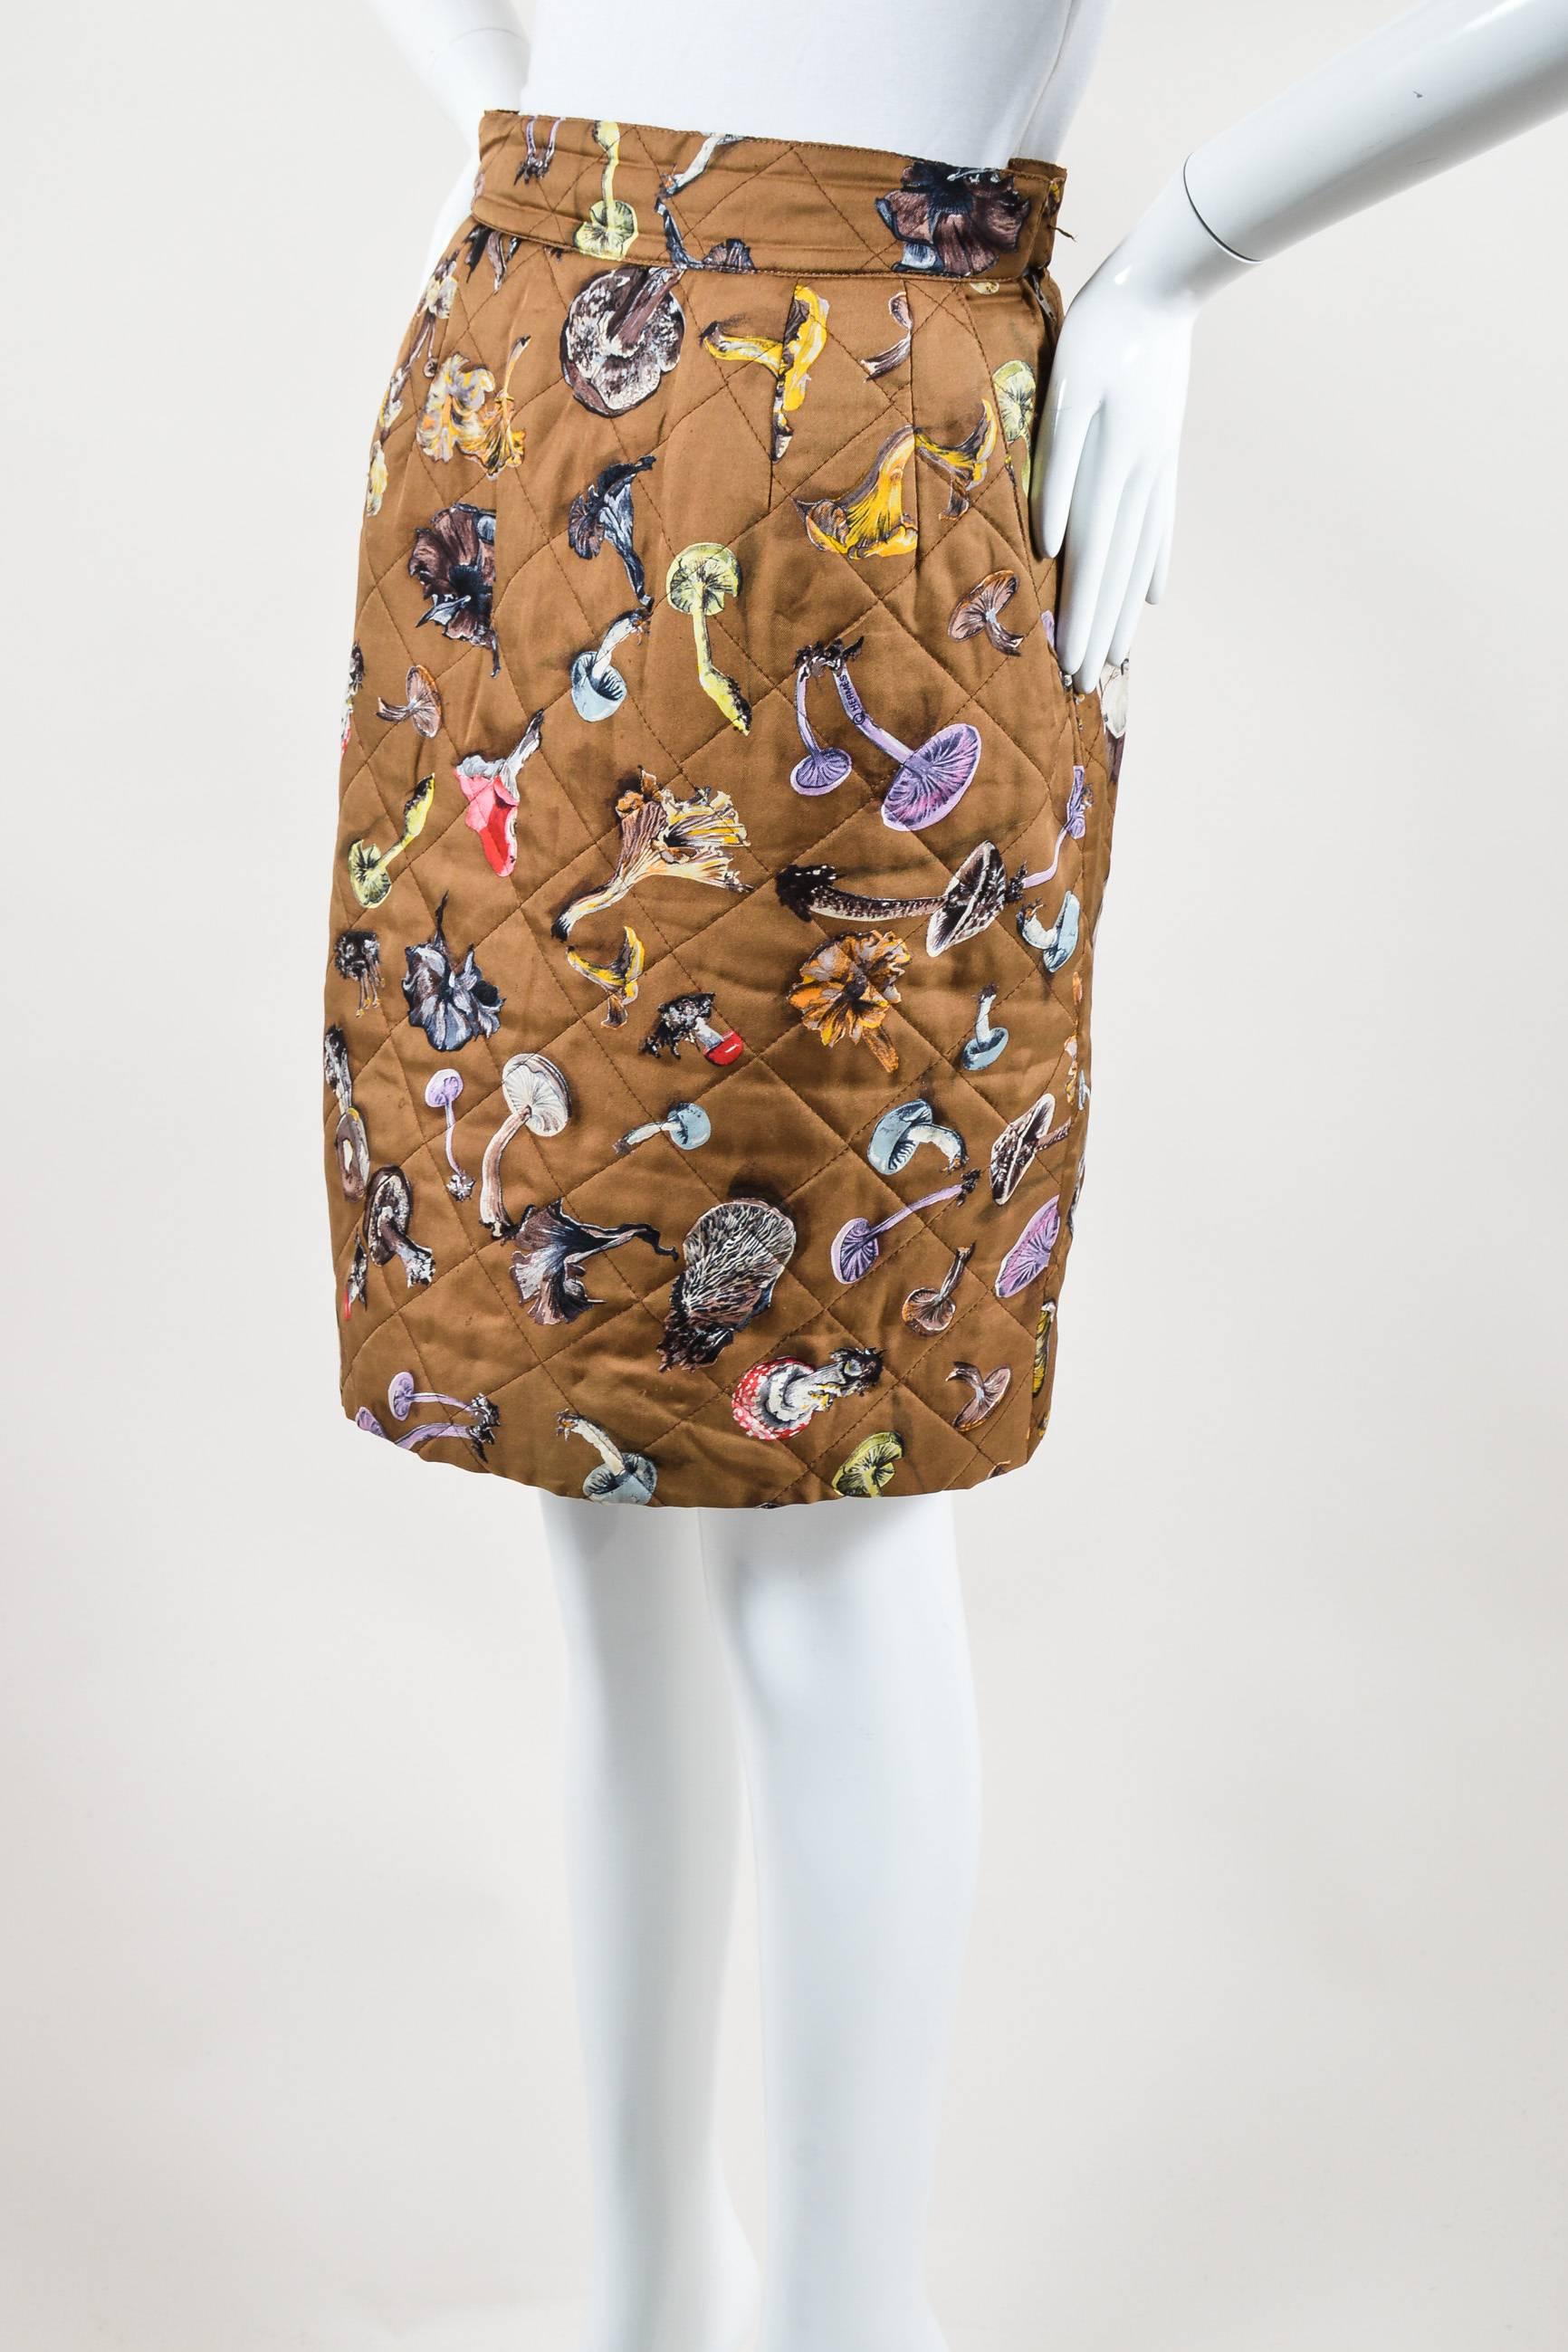 Unique versatile skirt that can be dressed up or down. Silk twill knit. Hits at knees. Diamond-quilted stitching. Multicolor mushroom print. Side slit pockets. Hidden side zip closure with hook-and-eye closure. Lined.

Condition details: